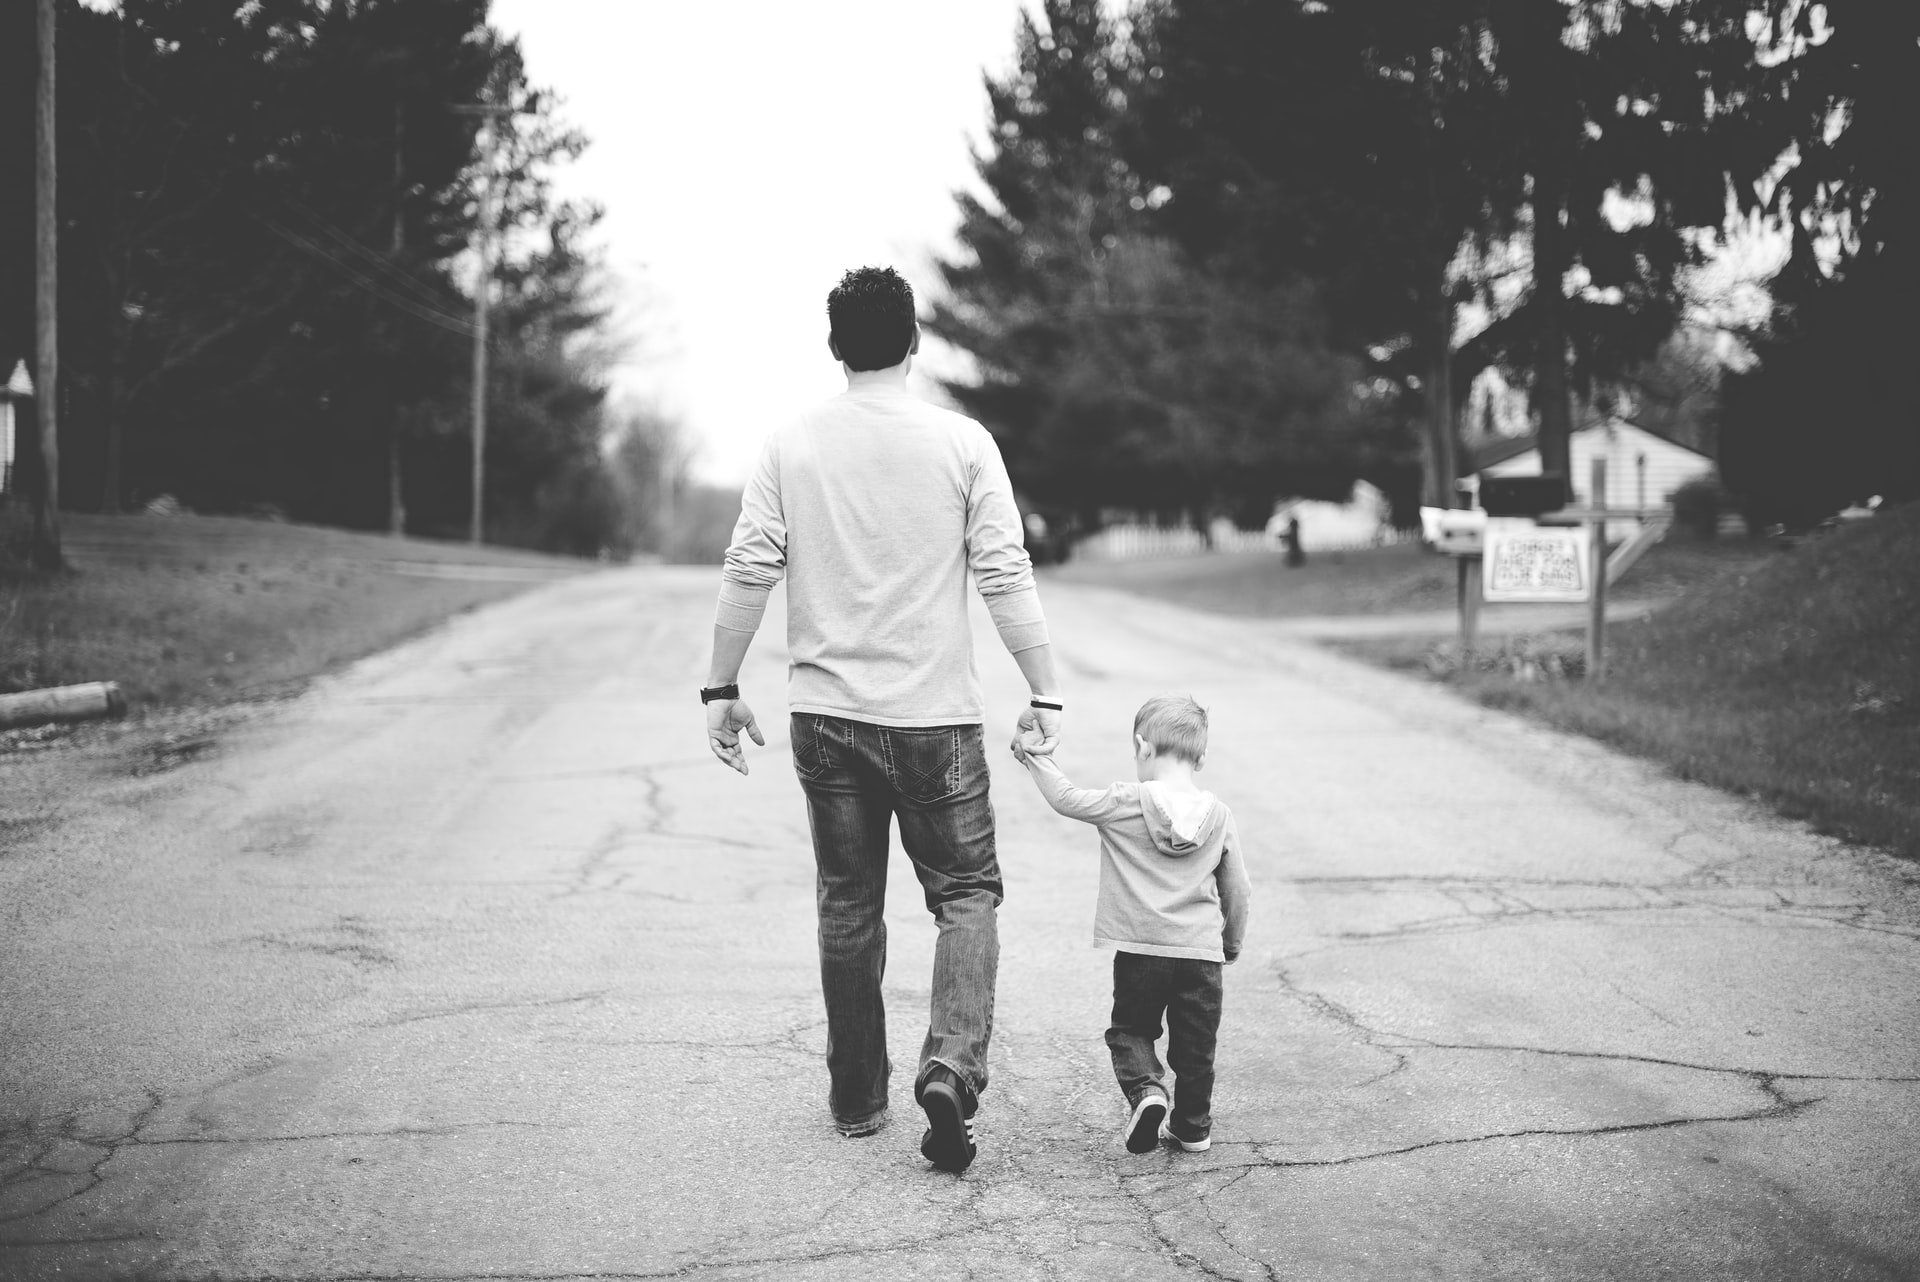 The boy lost his father when he was 8. | Source: Unsplash